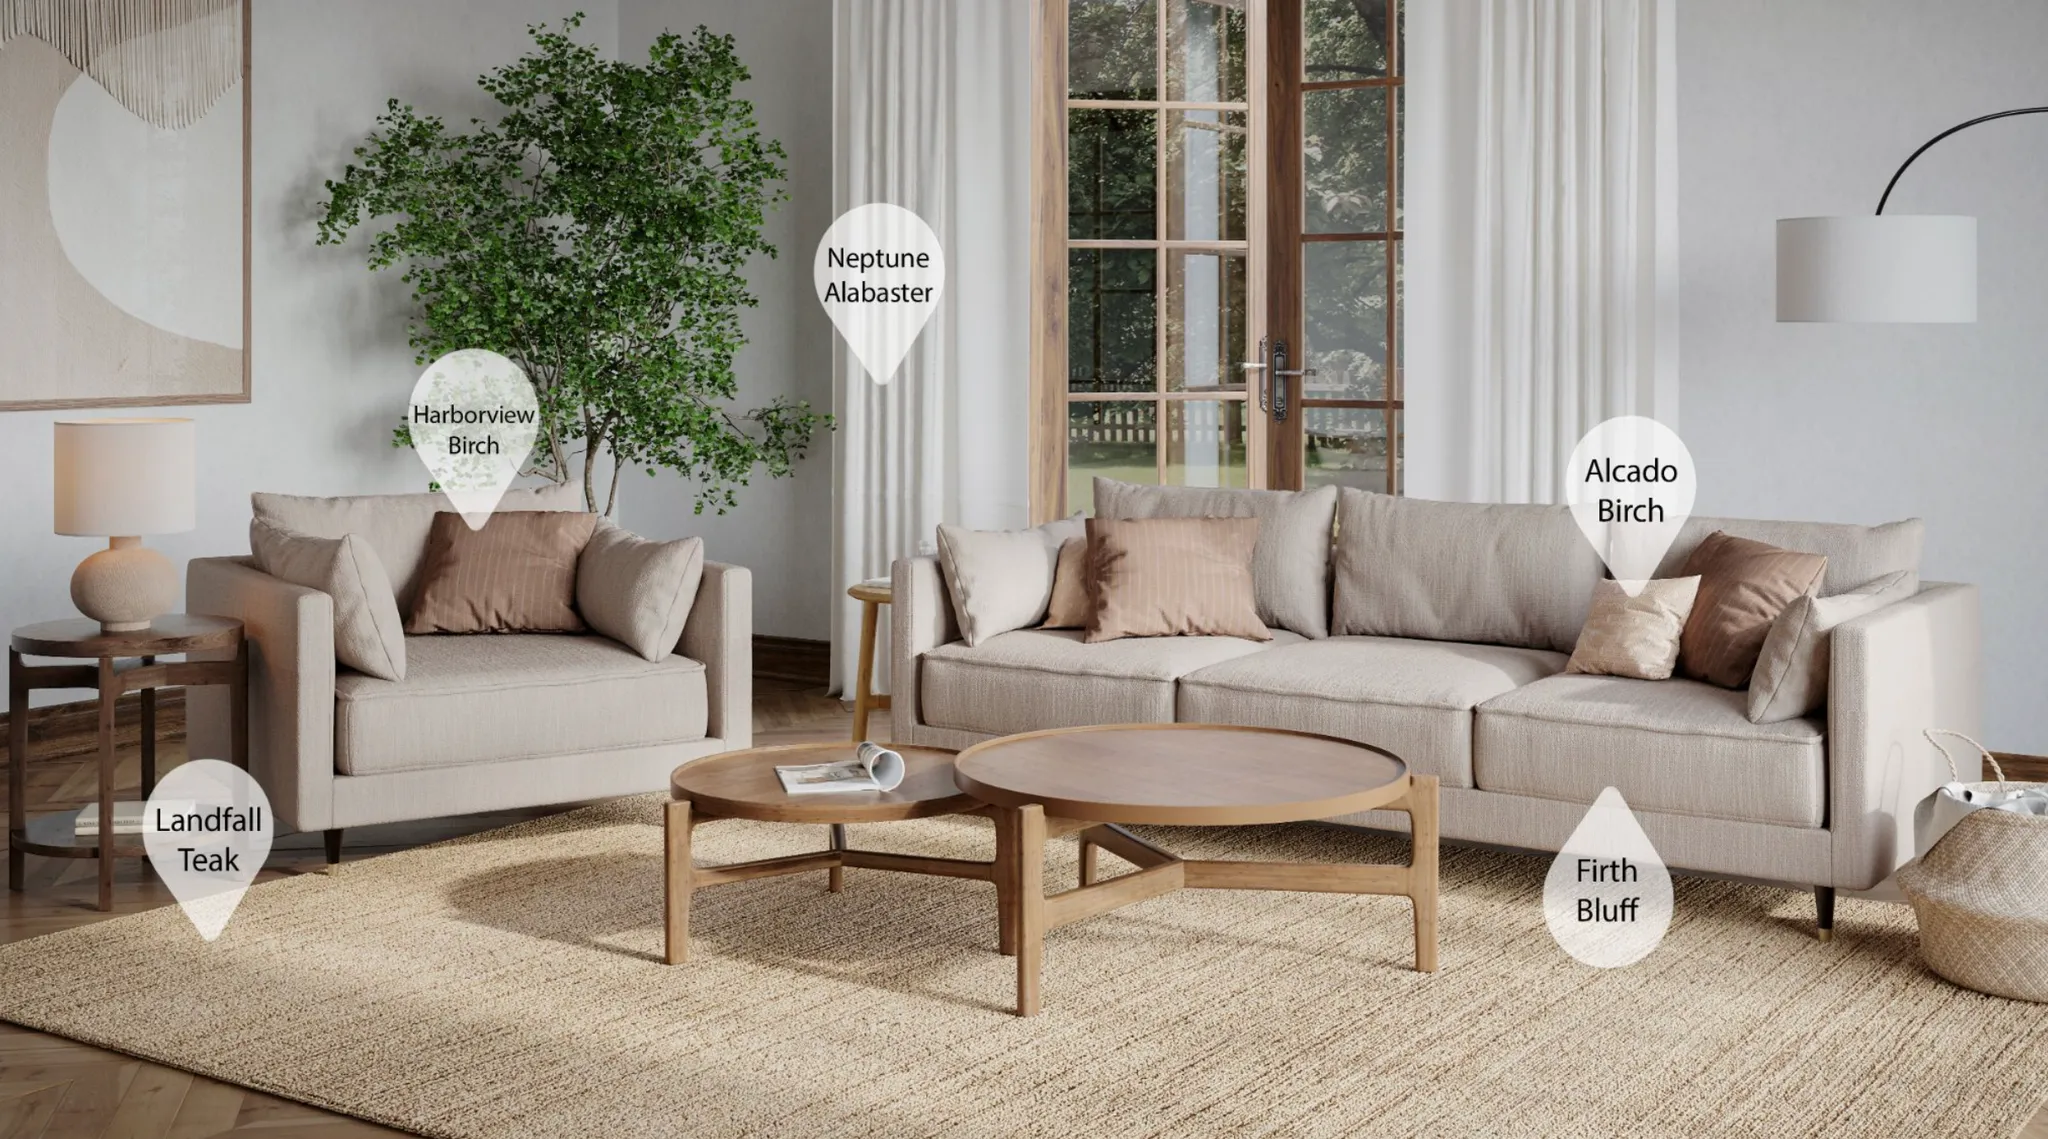 Shoppable Lifestyle Rendering for Furniture